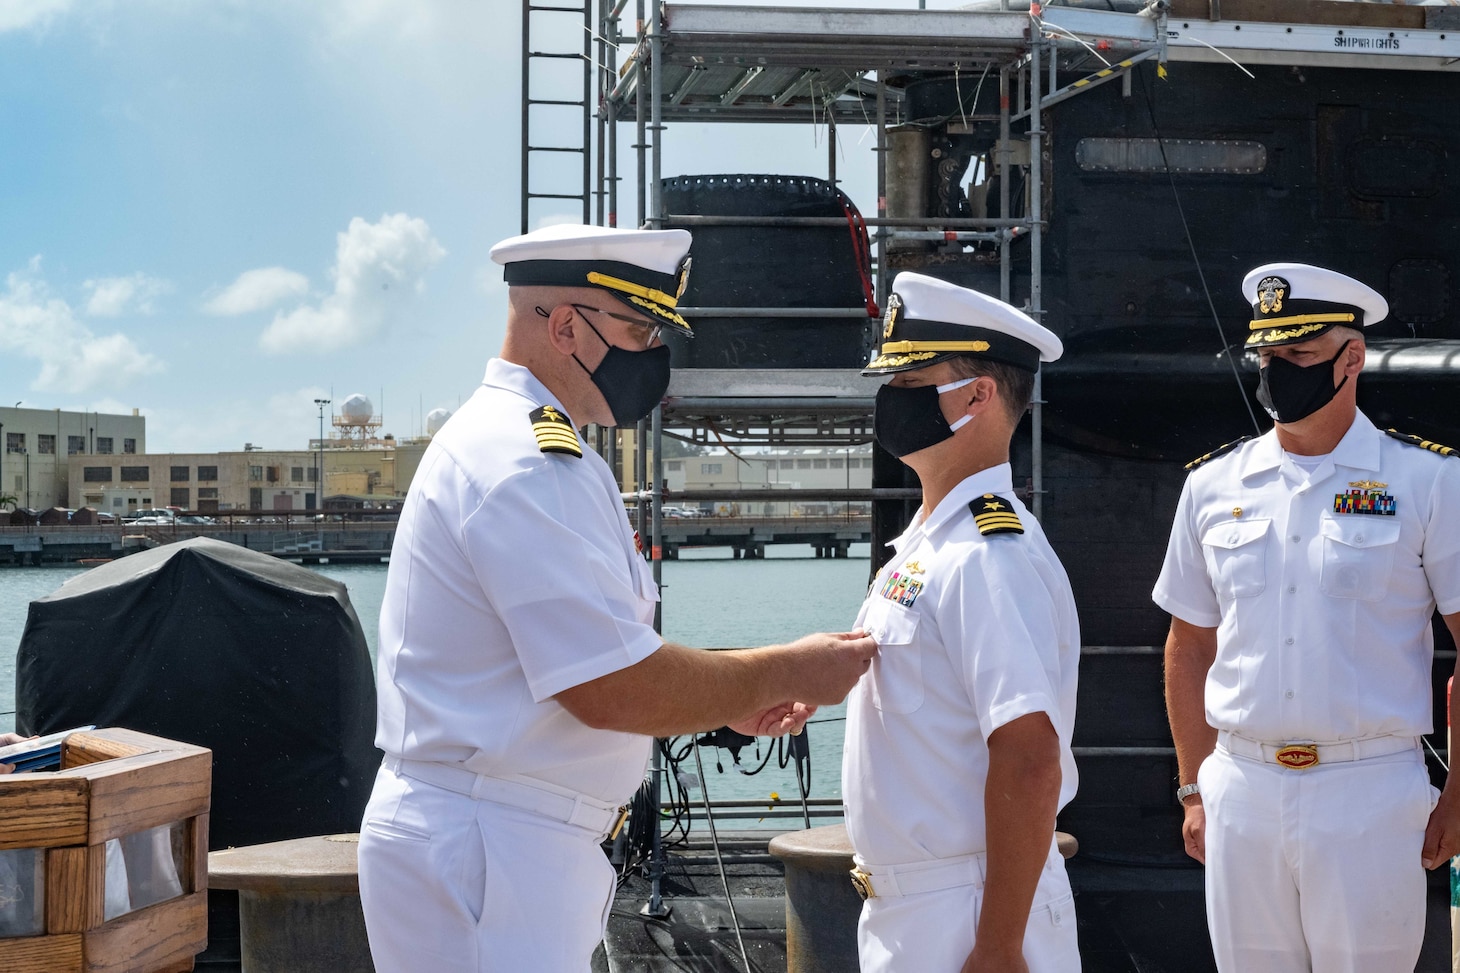 JOINT BASE PEARL HARBOR-HICKAM (April 7, 2021) -- Capt. Mike Majewski, left, commodore, Submarine Squadron 7, presents Cmdr. Chance Litton with his end of tour award during a change of command ceremony for the Los Angeles-class fast-attack submarine USS Chicago (SSN 721), April 7. Cmdr. Andrew J. Kopacz relieved Litton as Chicago's commanding officer during the ceremony on the historic submarine piers at Joint Base Pearl Harbor-Hickam. (U.S. Navy photo by Chief Mass Communication Specialist Amanda R. Gray/Released)